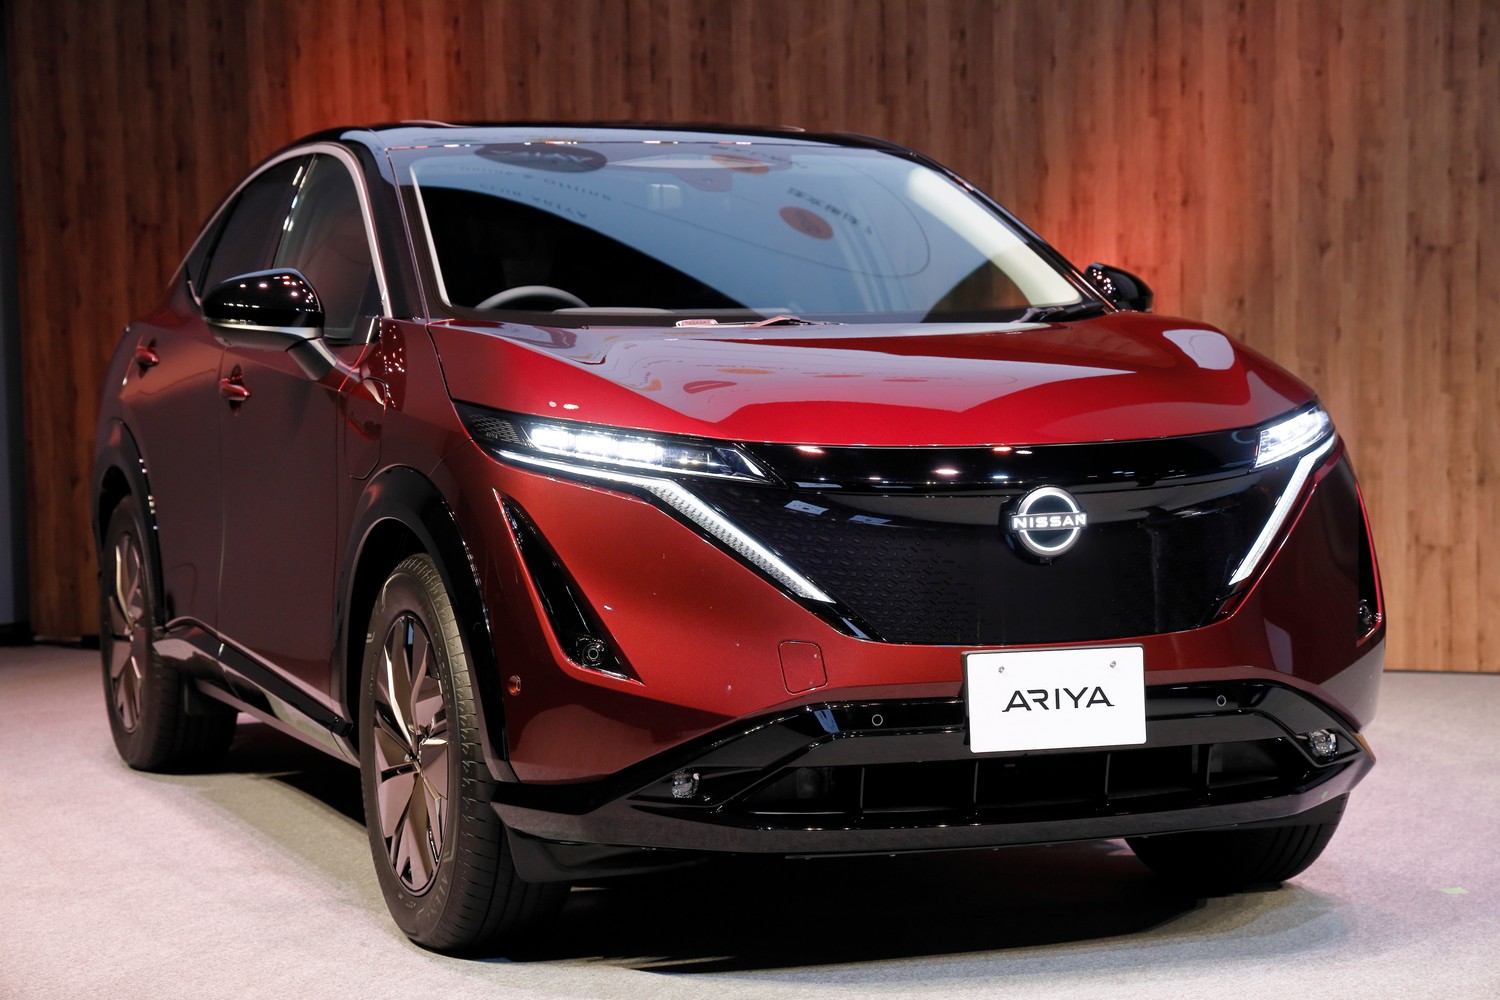 Nissan Ariya launch delayed to winter 2021, but preordering begins today